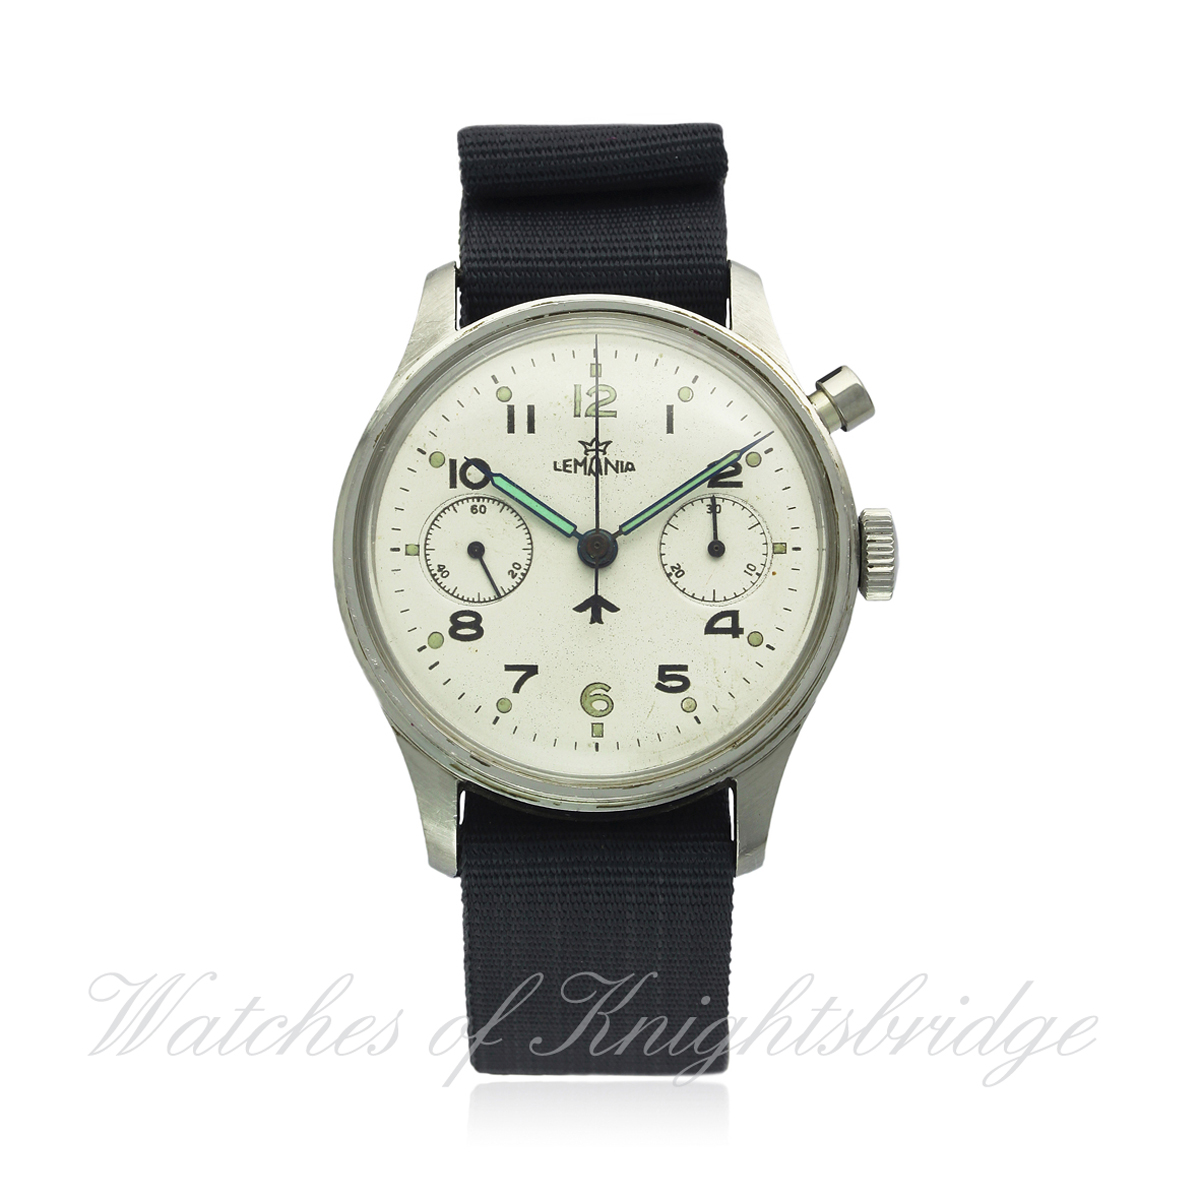 A GENTLEMAN`S STAINLESS STEEL BRITISH MILITARY ROYAL NAVY LEMANIA SINGLE BUTTON CHRONOGRAPH PILOTS